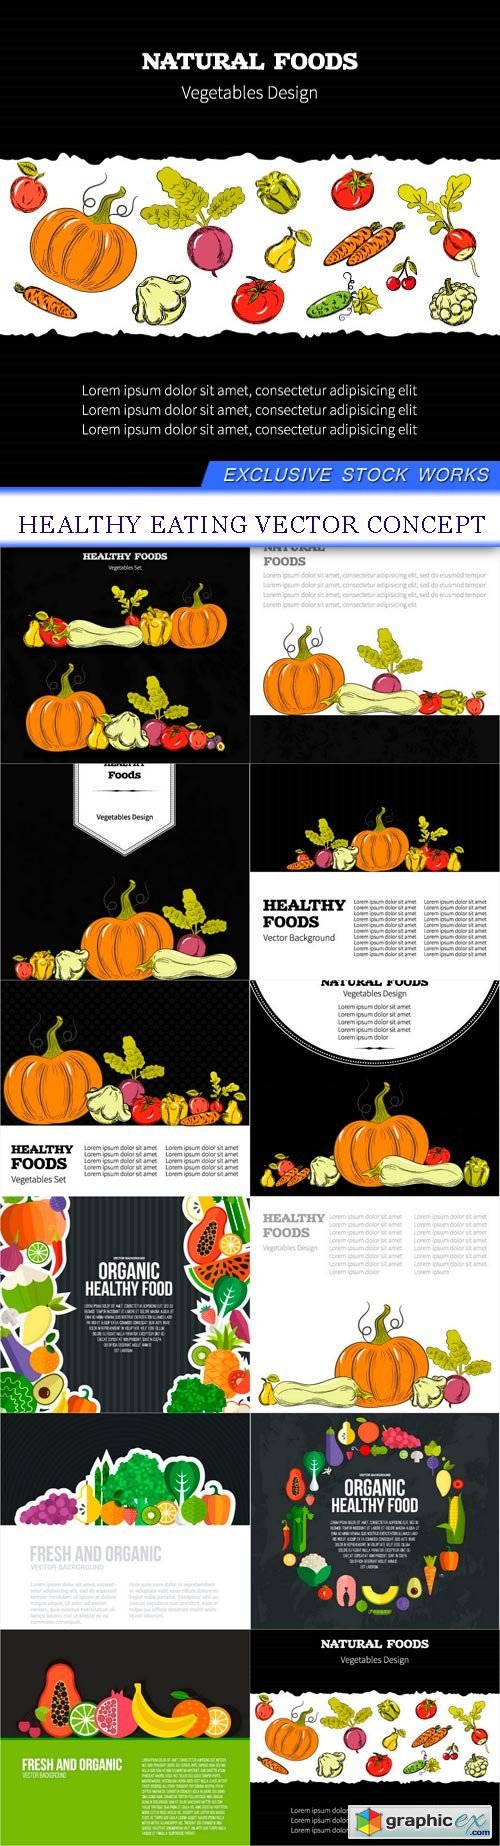 Healthy eating vector concept 12x EPS